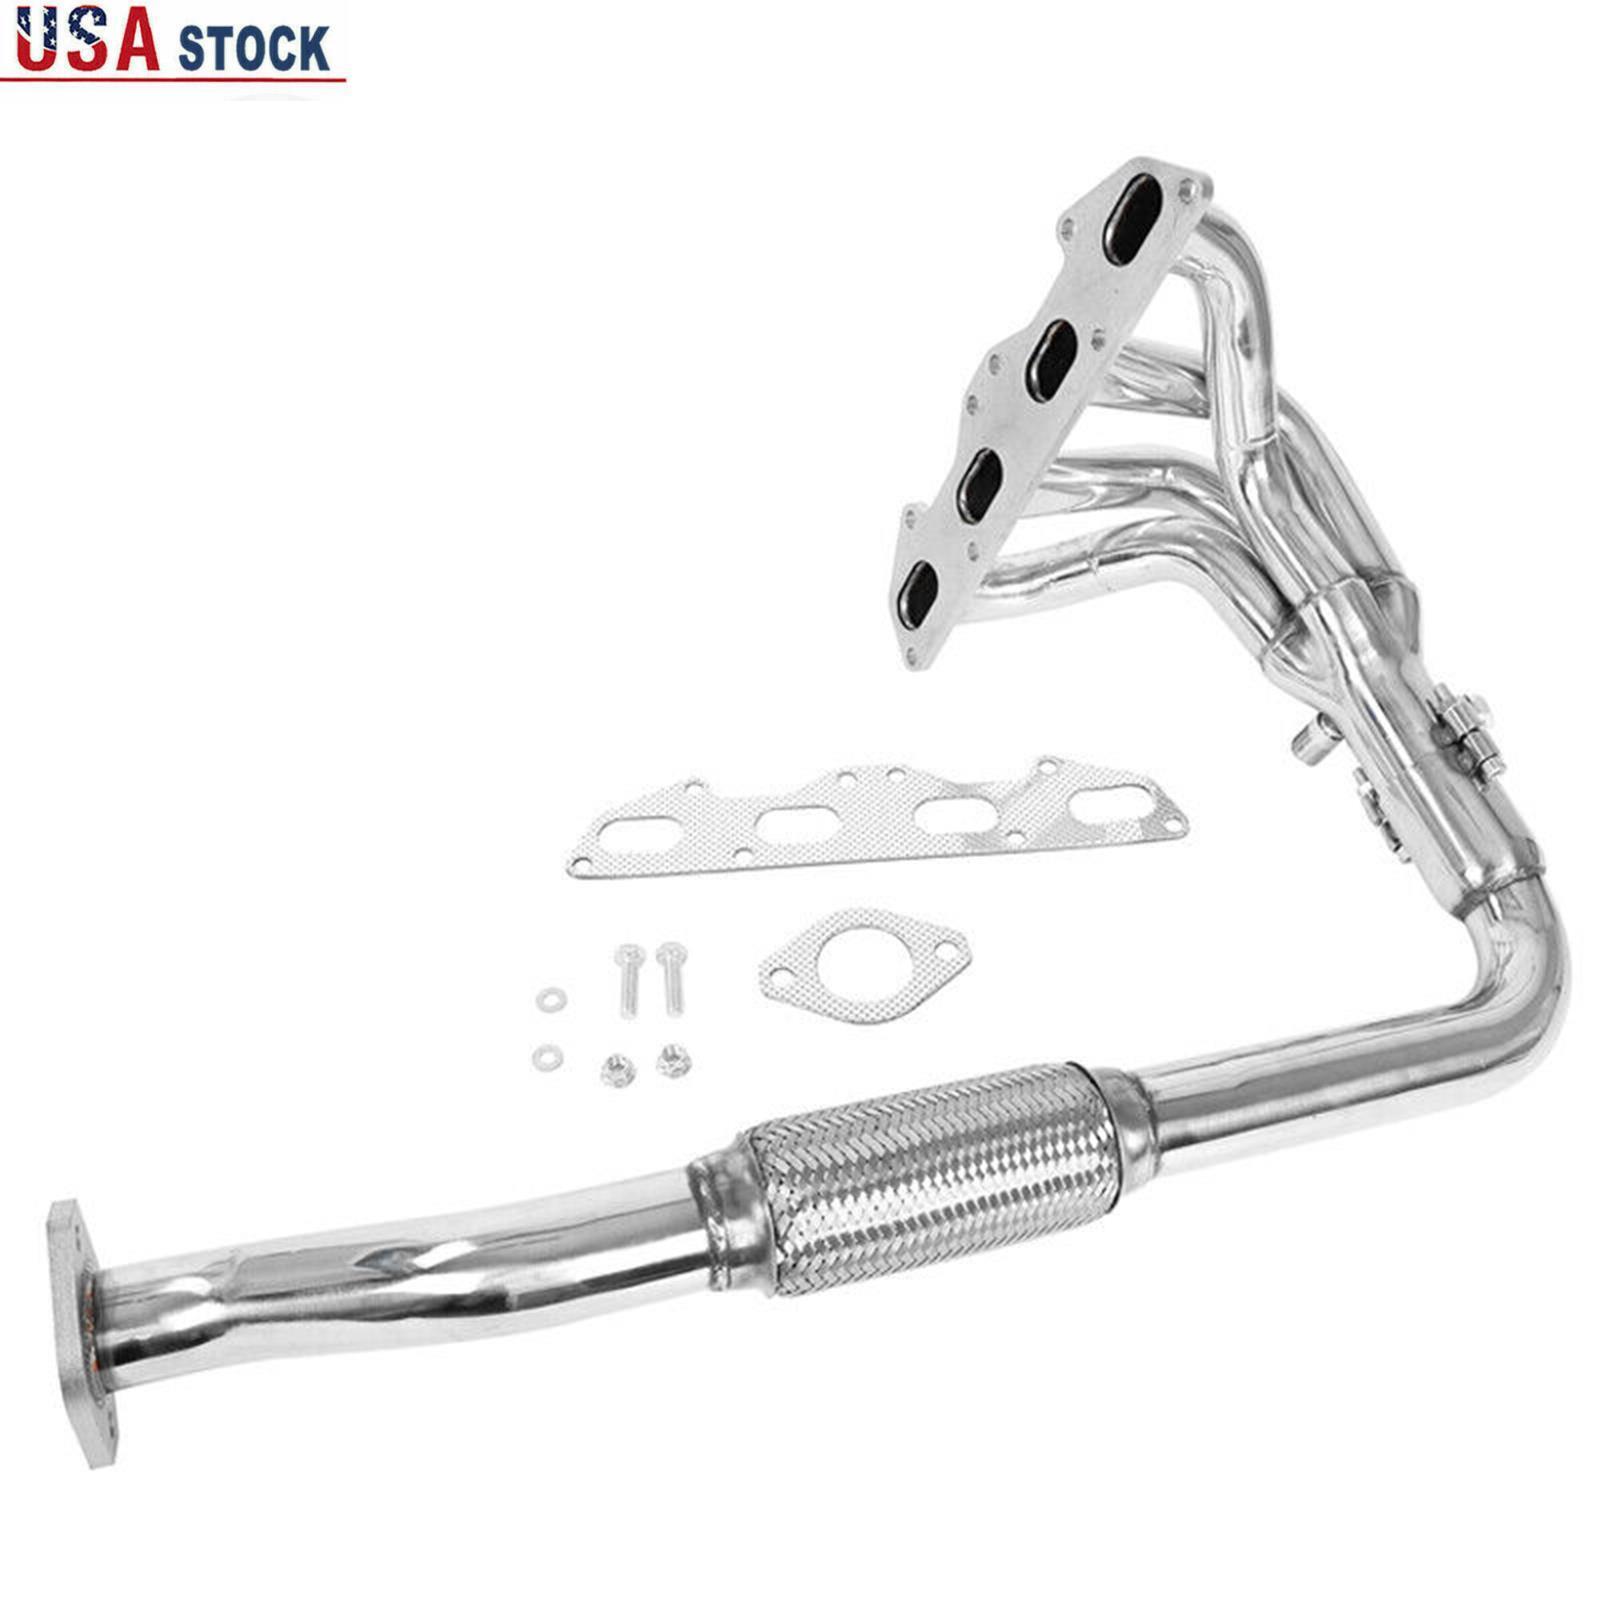 Fits Mitsubishi Eclipse 2.0 95-99 1995-1999 2.0L Exhaust Header Stainless Steel